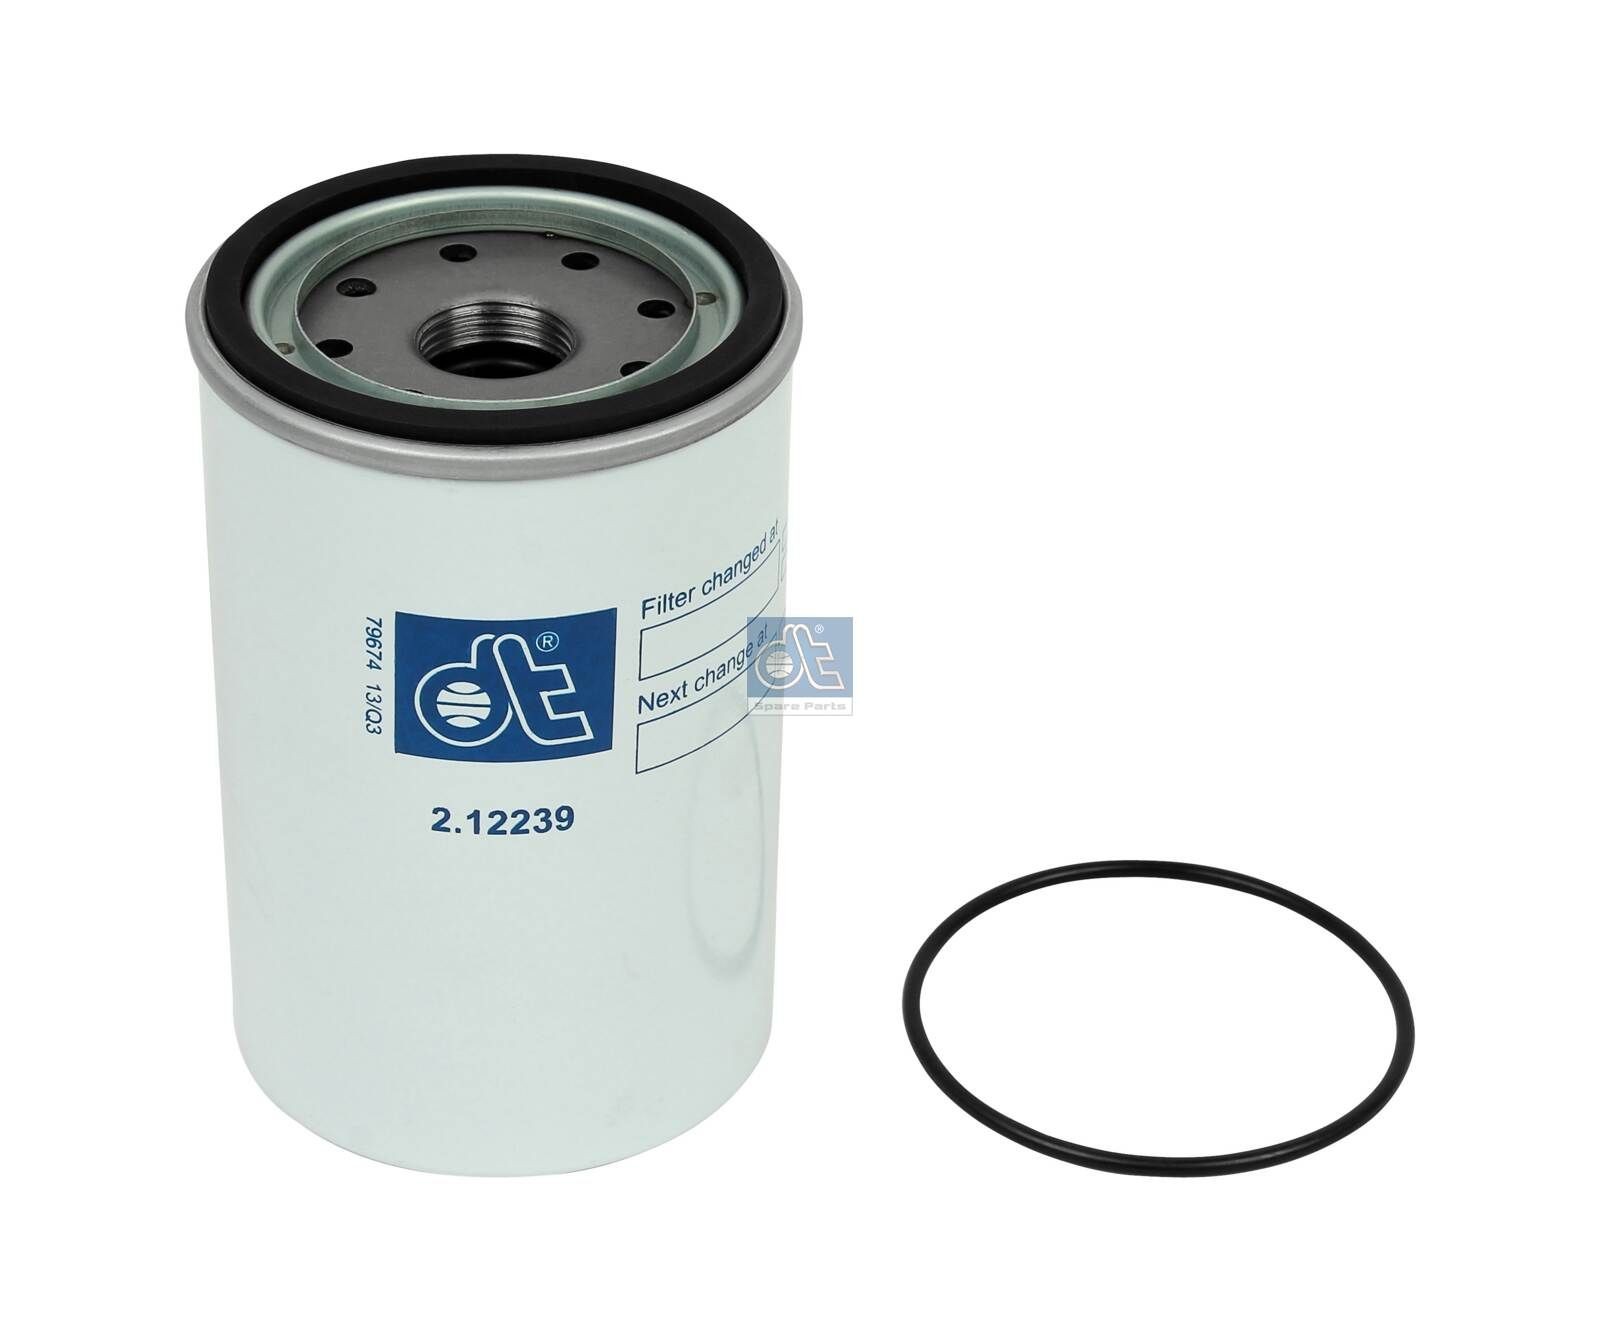 WK 940/33 x DT Spare Parts 2.12239 Fuel filter 74 20 998 634